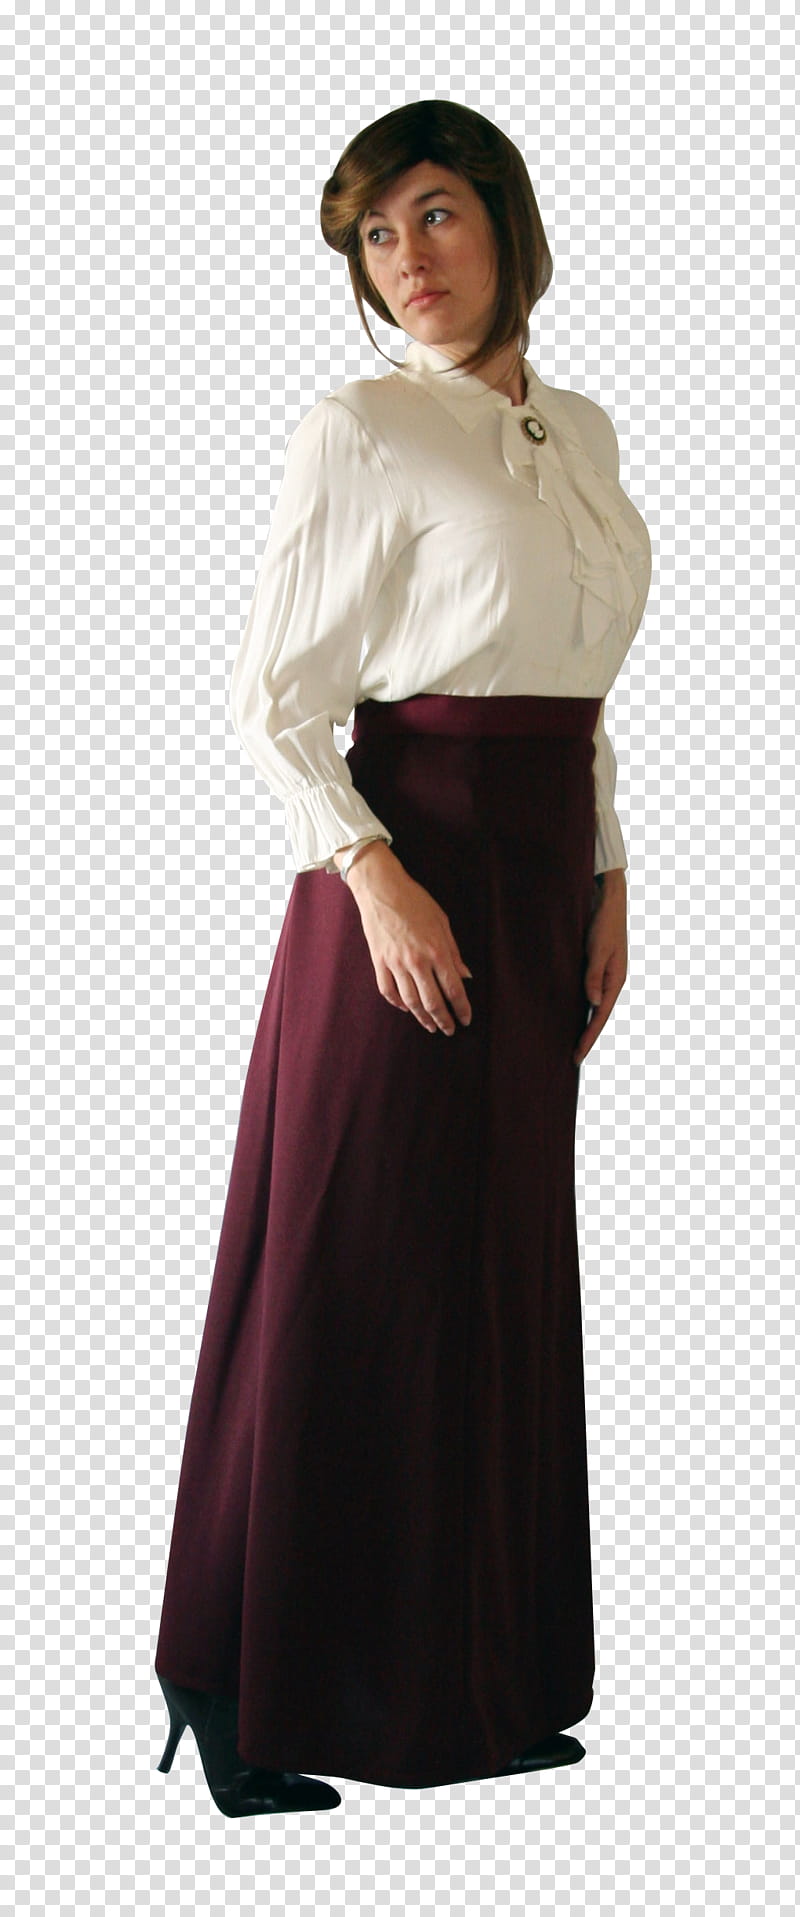 Long Paloma Negra , woman wearing white long-sleeved top and purple skirt transparent background PNG clipart